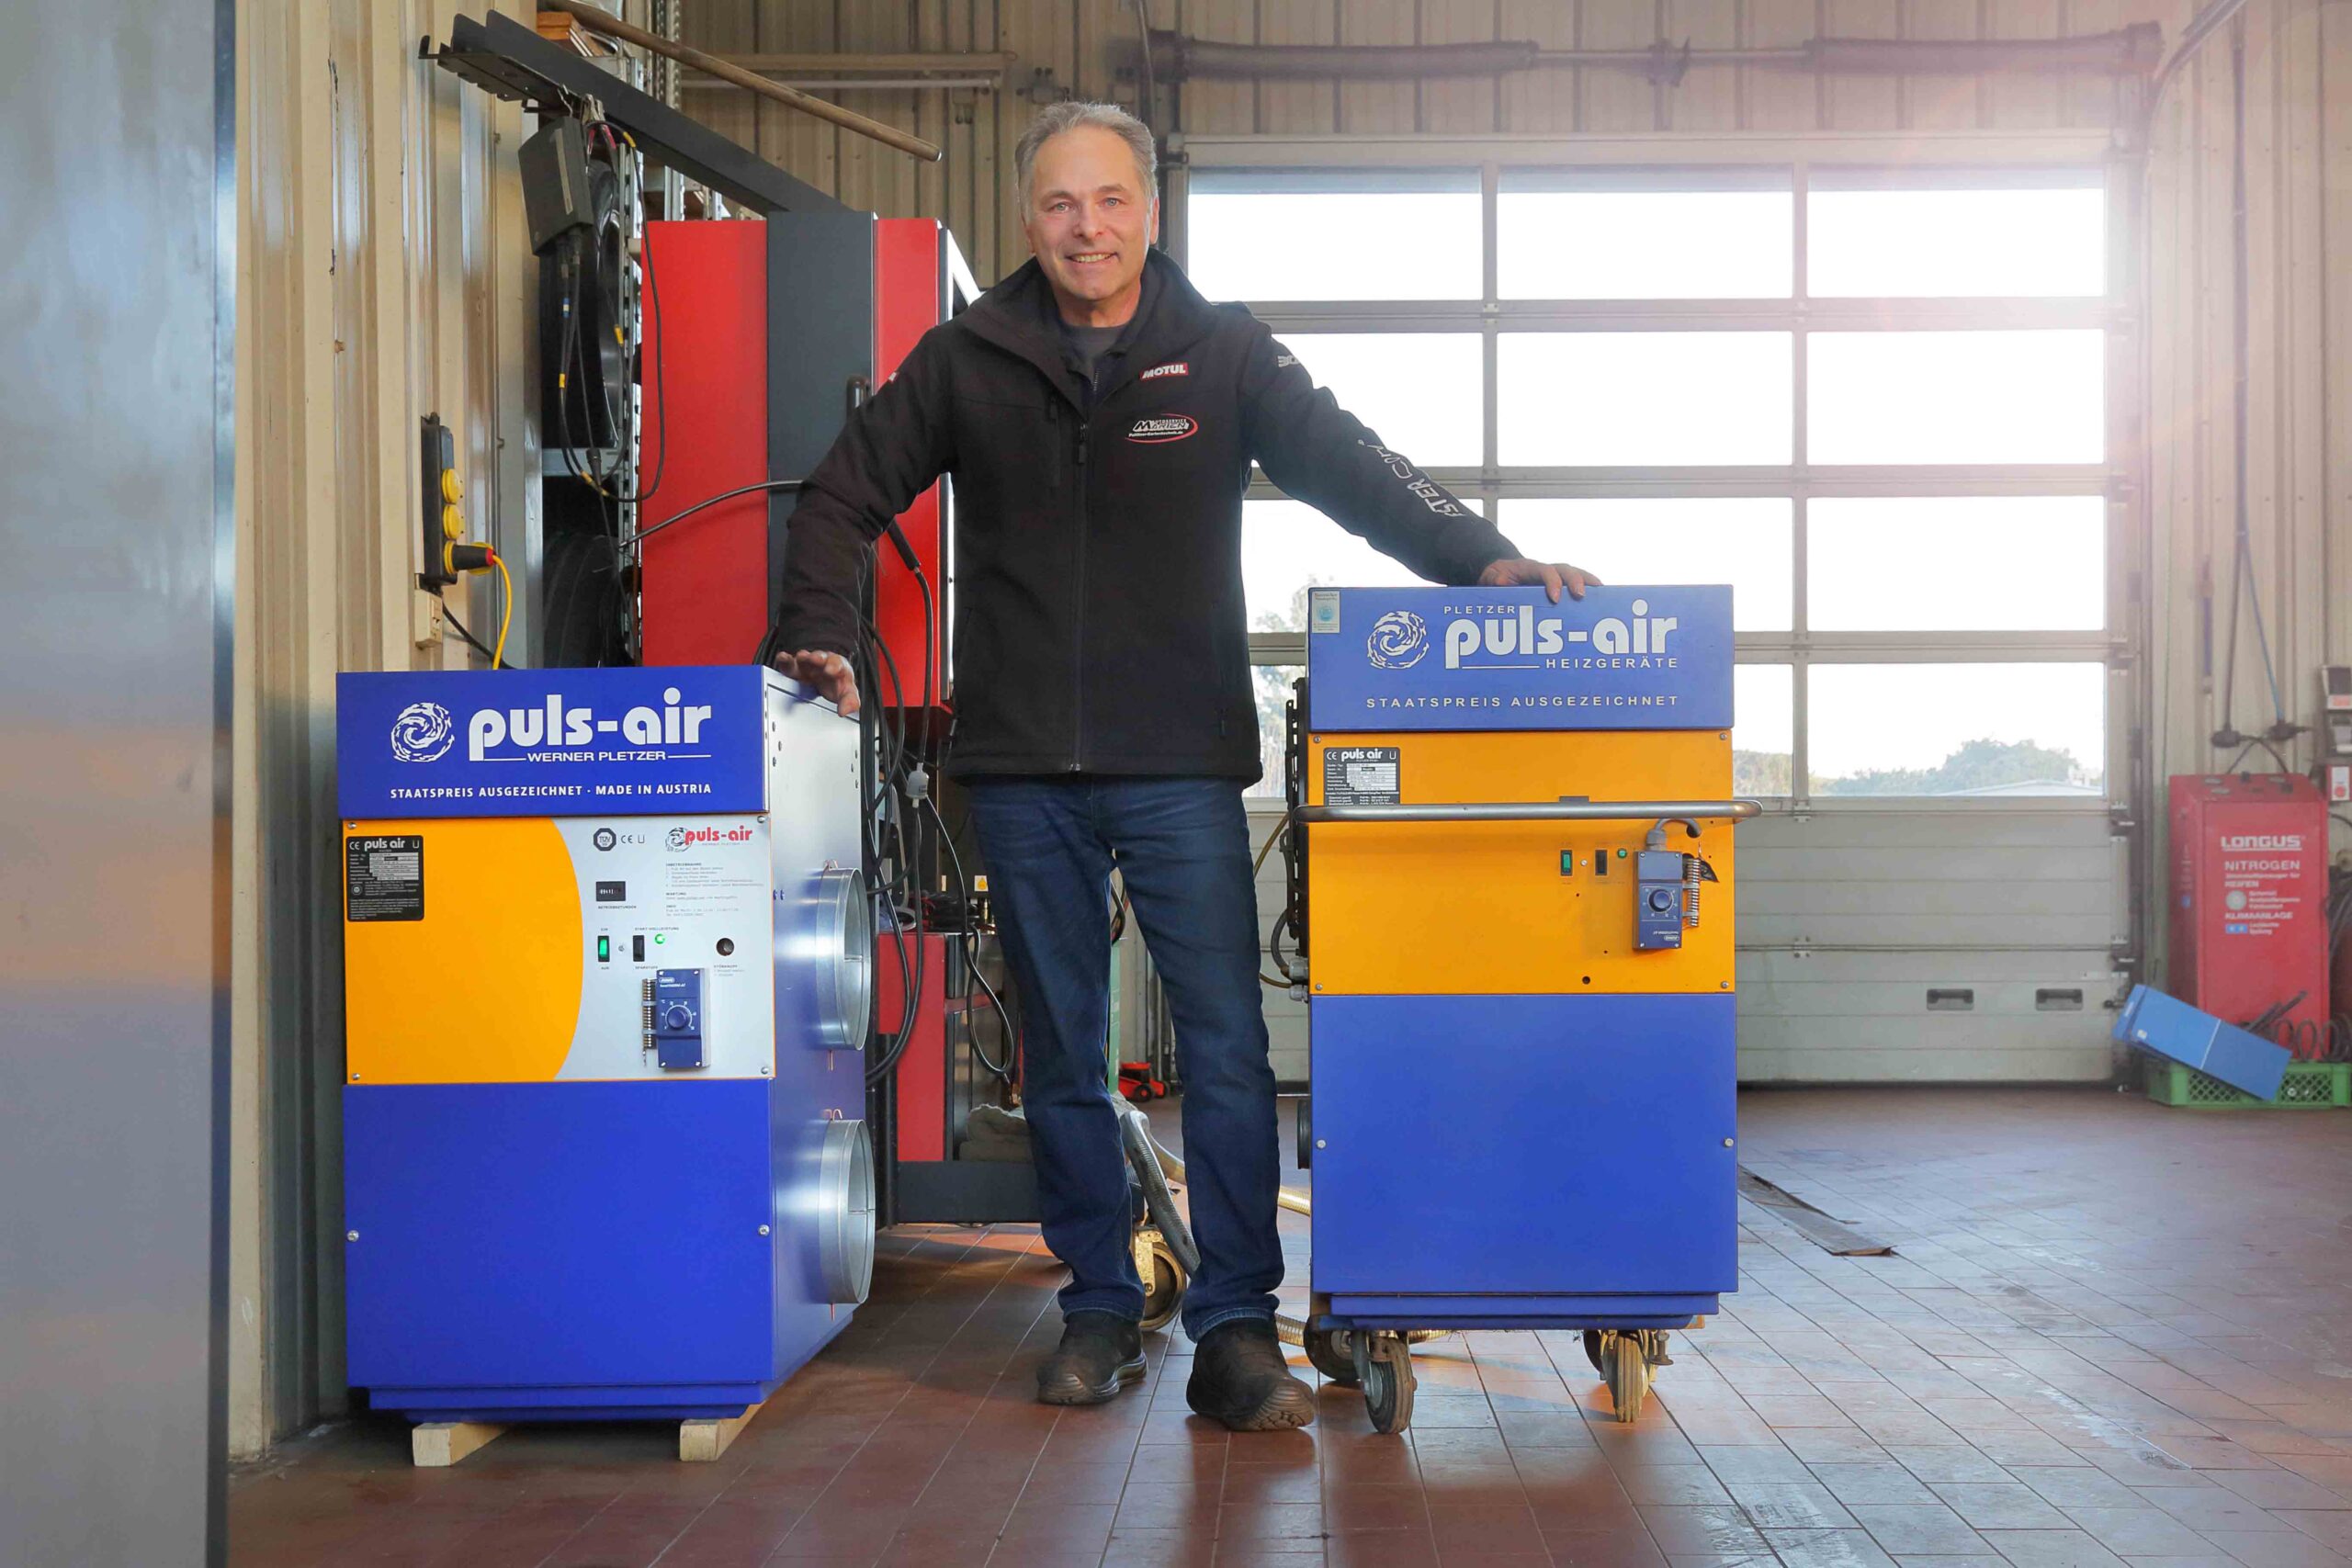 Frank Marien, Autoservice Marien heats with Puls-air workshop heating system